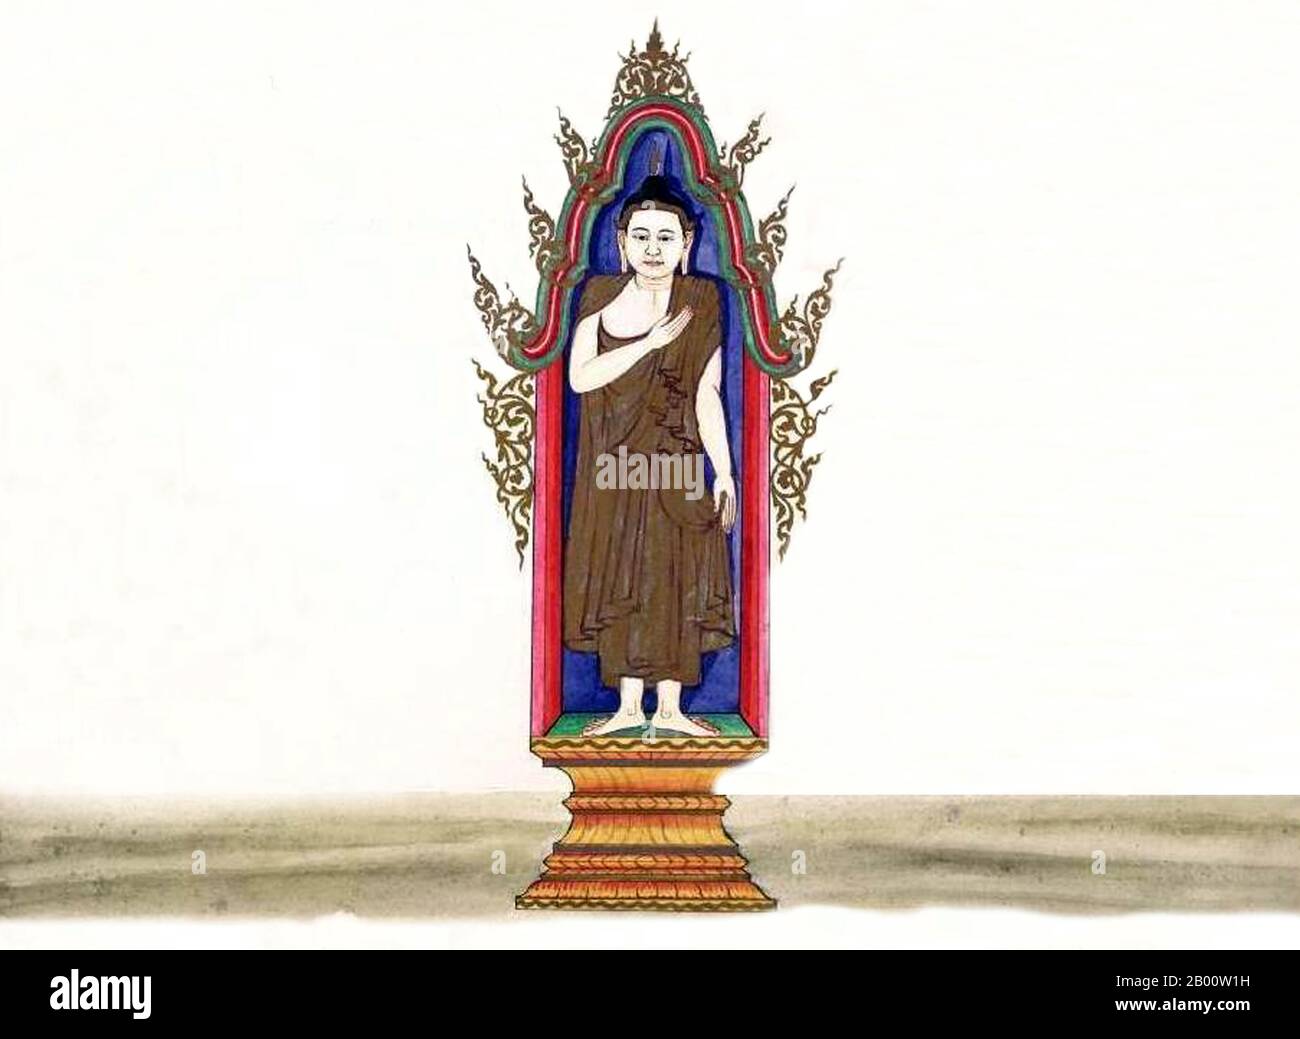 Burma/Myanmar: Gautama Buddha.  This painting, by an unknown Burmese artist, is from a watercolour sketch album dating from c.1897 that includes illustrations of Buddhist monks, the Buddha, monasteries, cremations and domestic scenes.  Legend attributes the first Buddhist doctrine in Burma to 228 BCE when Sohn Uttar Sthavira, one of the royal monks to Emperor Ashoka the Great of India, came to the country with other monks and sacred texts. However, the era of Buddhism truly began in the 11th century after King Anawrahta of Pagan (Bagan) was converted to Theravada Buddhism. Stock Photo